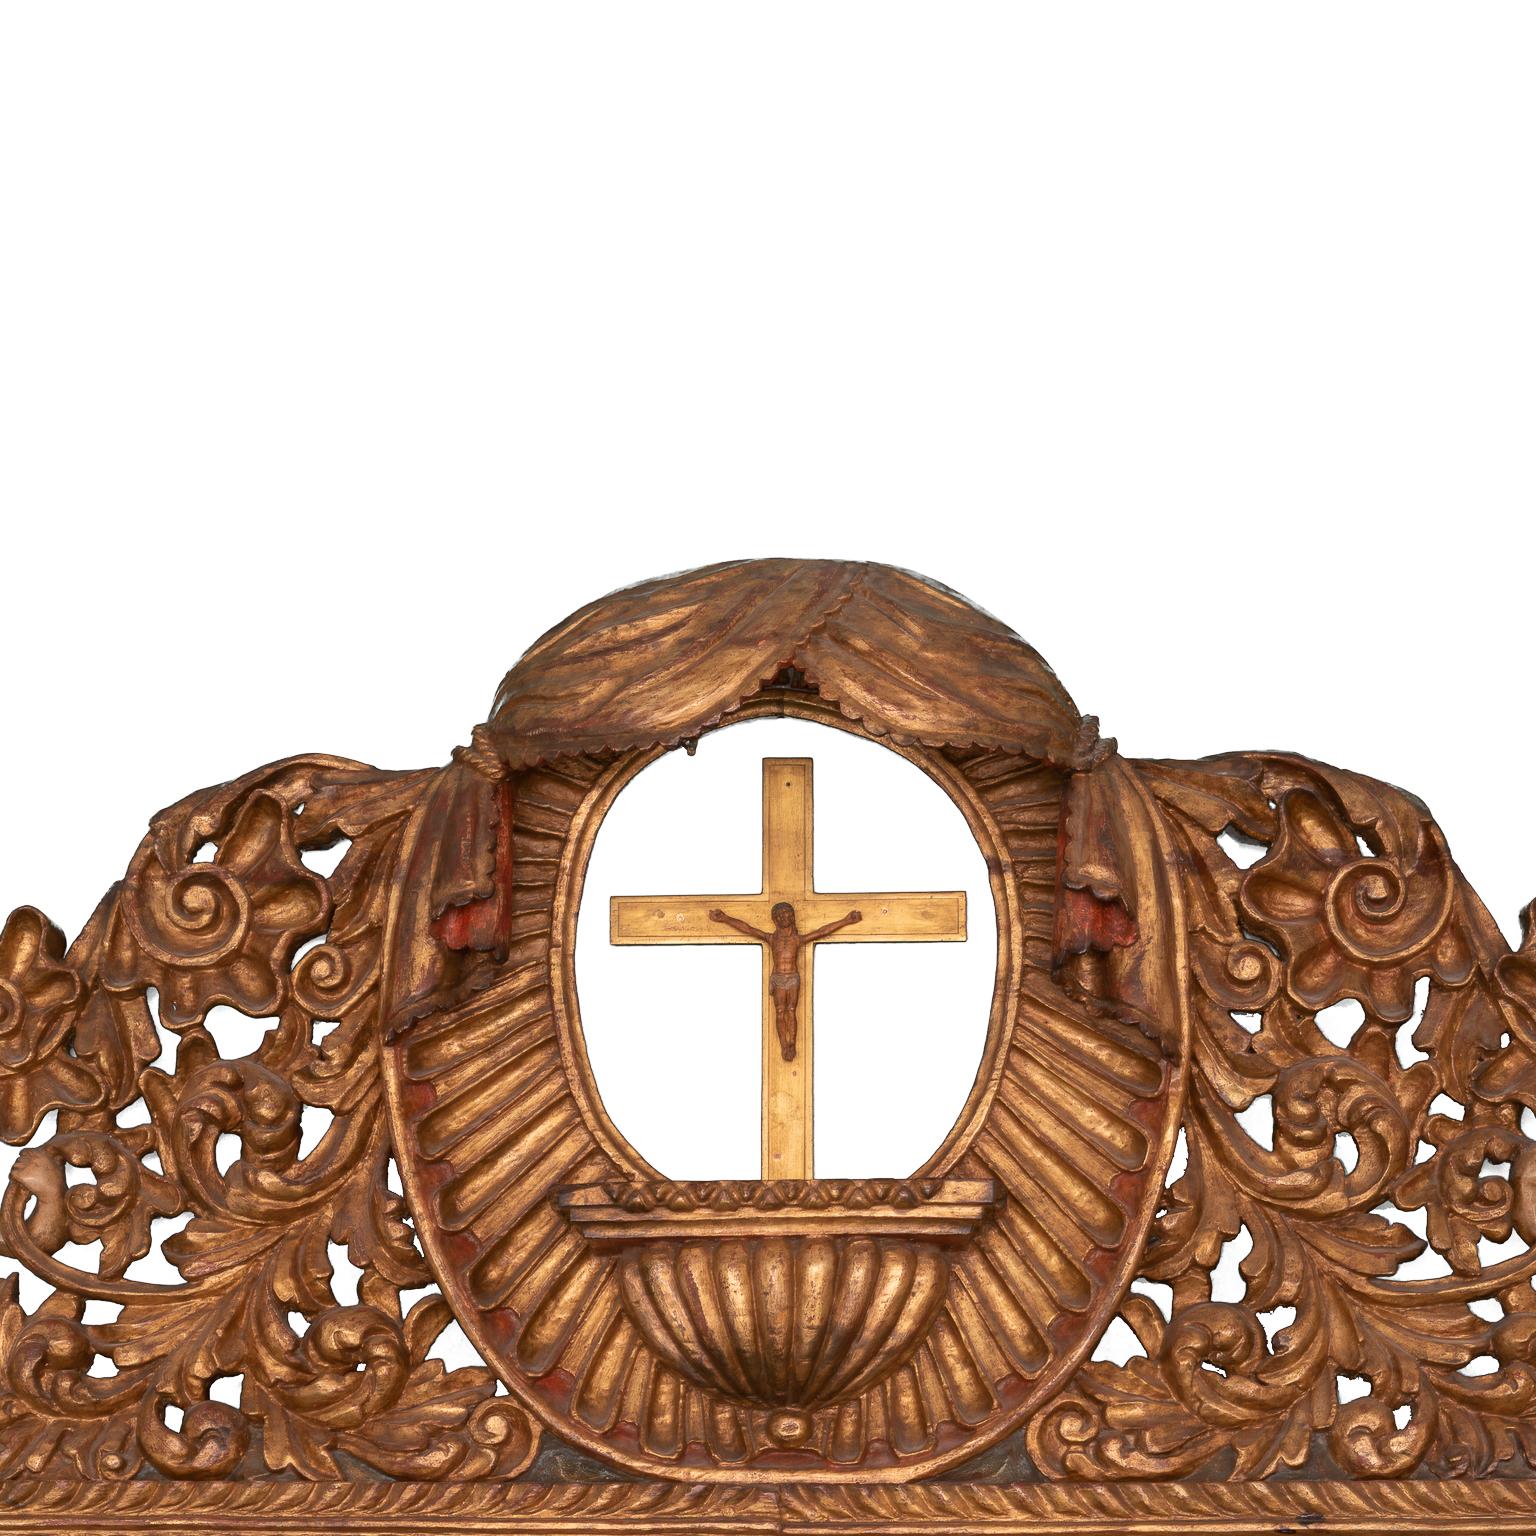 Baroque style headboard, made in the late 19th century
with carved representations of saints, birth and virgin.